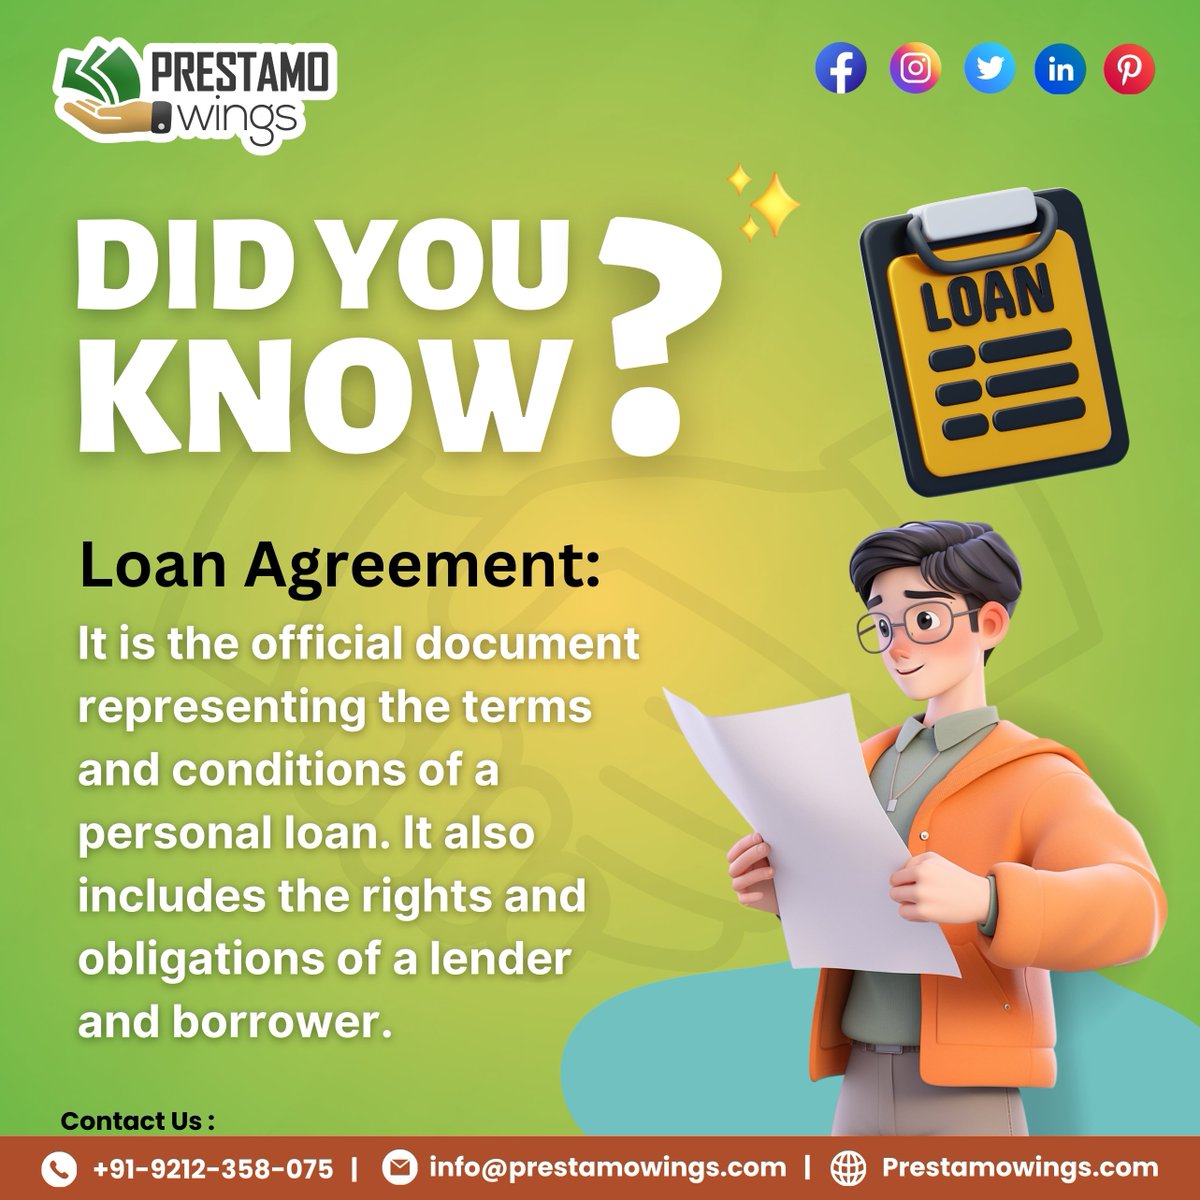 Unlocking Financial Freedom: Your Personal Loan Agreement is more than just paperwork; it's the key to understanding your financial rights.
Just Give Us a Call - +91 9212358075
prestamowings.com
.
#Prestamowings #loanagreement #didyouknow #loan #EmpowerYourself #Disbursal